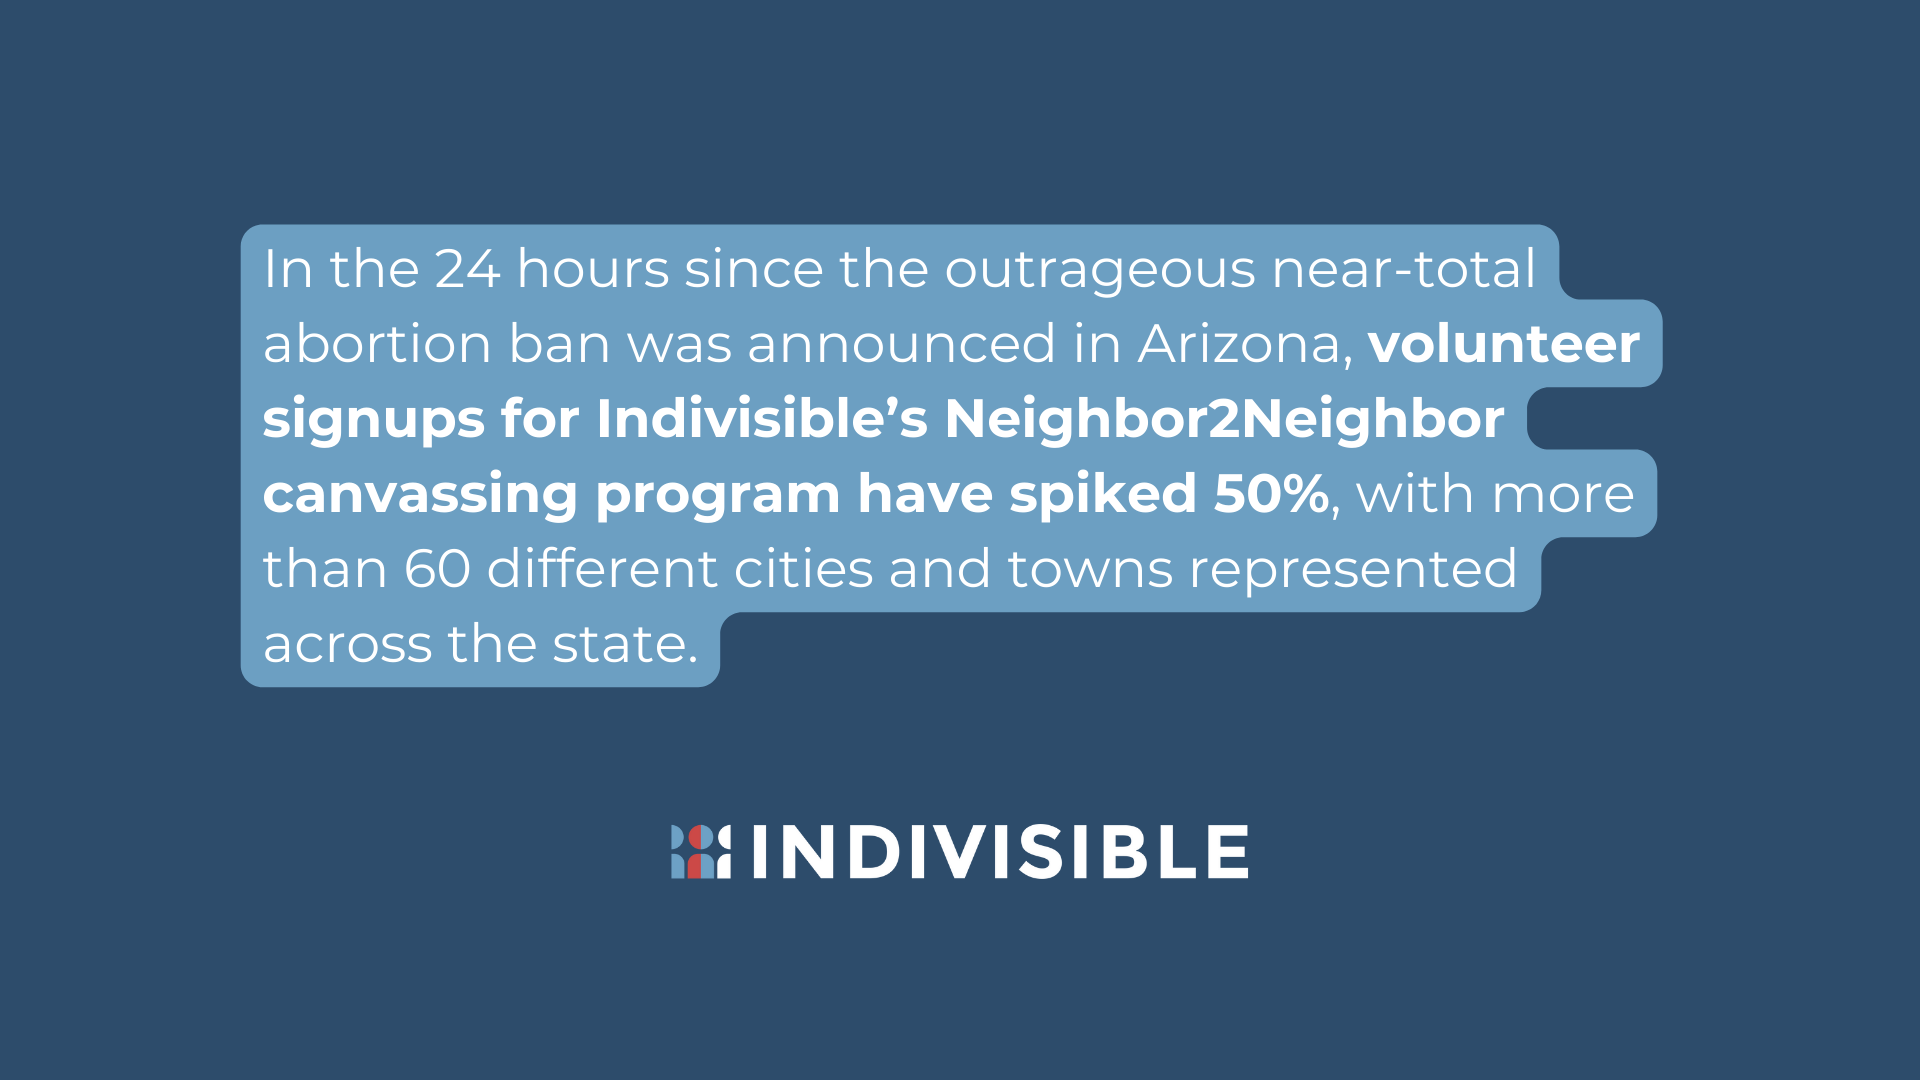 In the 24 hours since the outrageous near-total abortion ban was announced in Arizona, volunteer signups for Indivisible’s Neighbor2Neighbor canvassing program have spiked 50%, with more than 60 different cities and towns represented across the state.